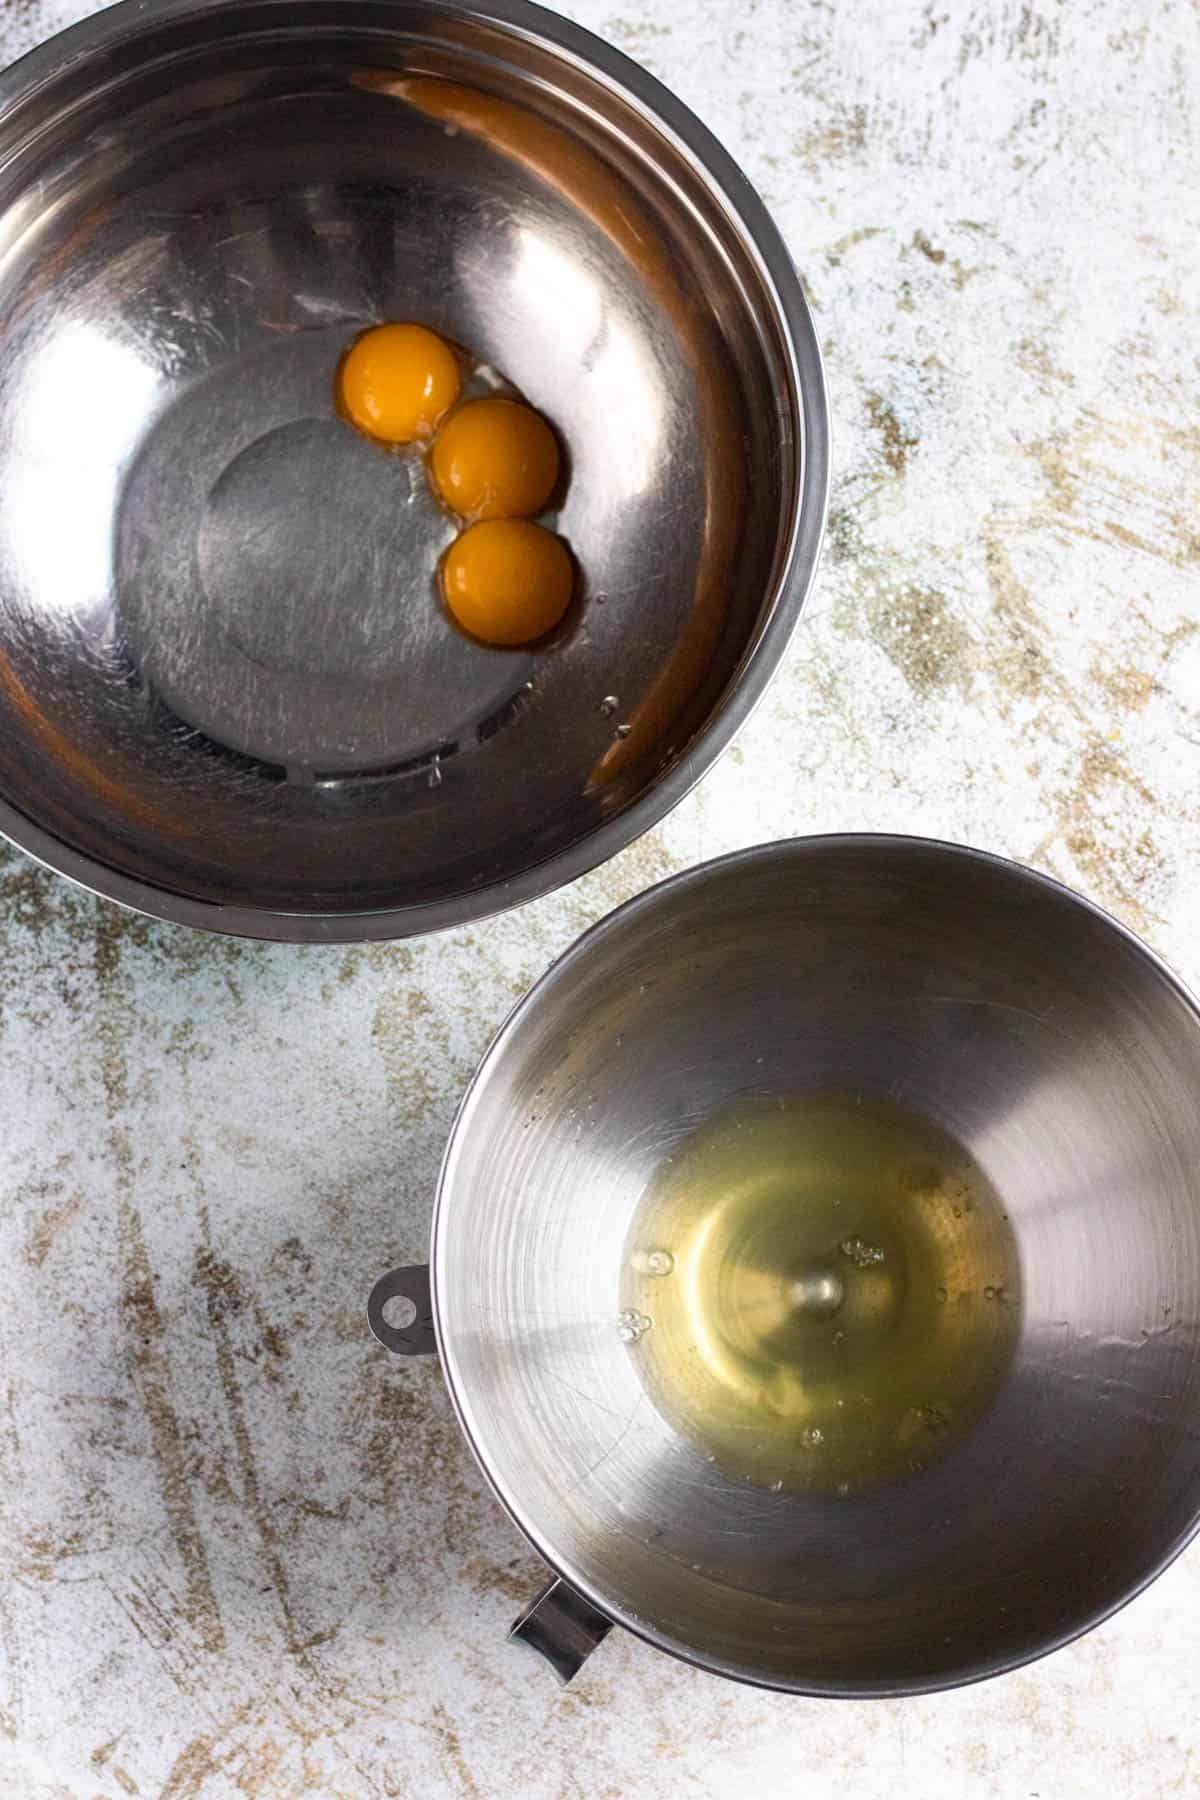 3 eggs separated with the whites in one bowl and yolks in another. 